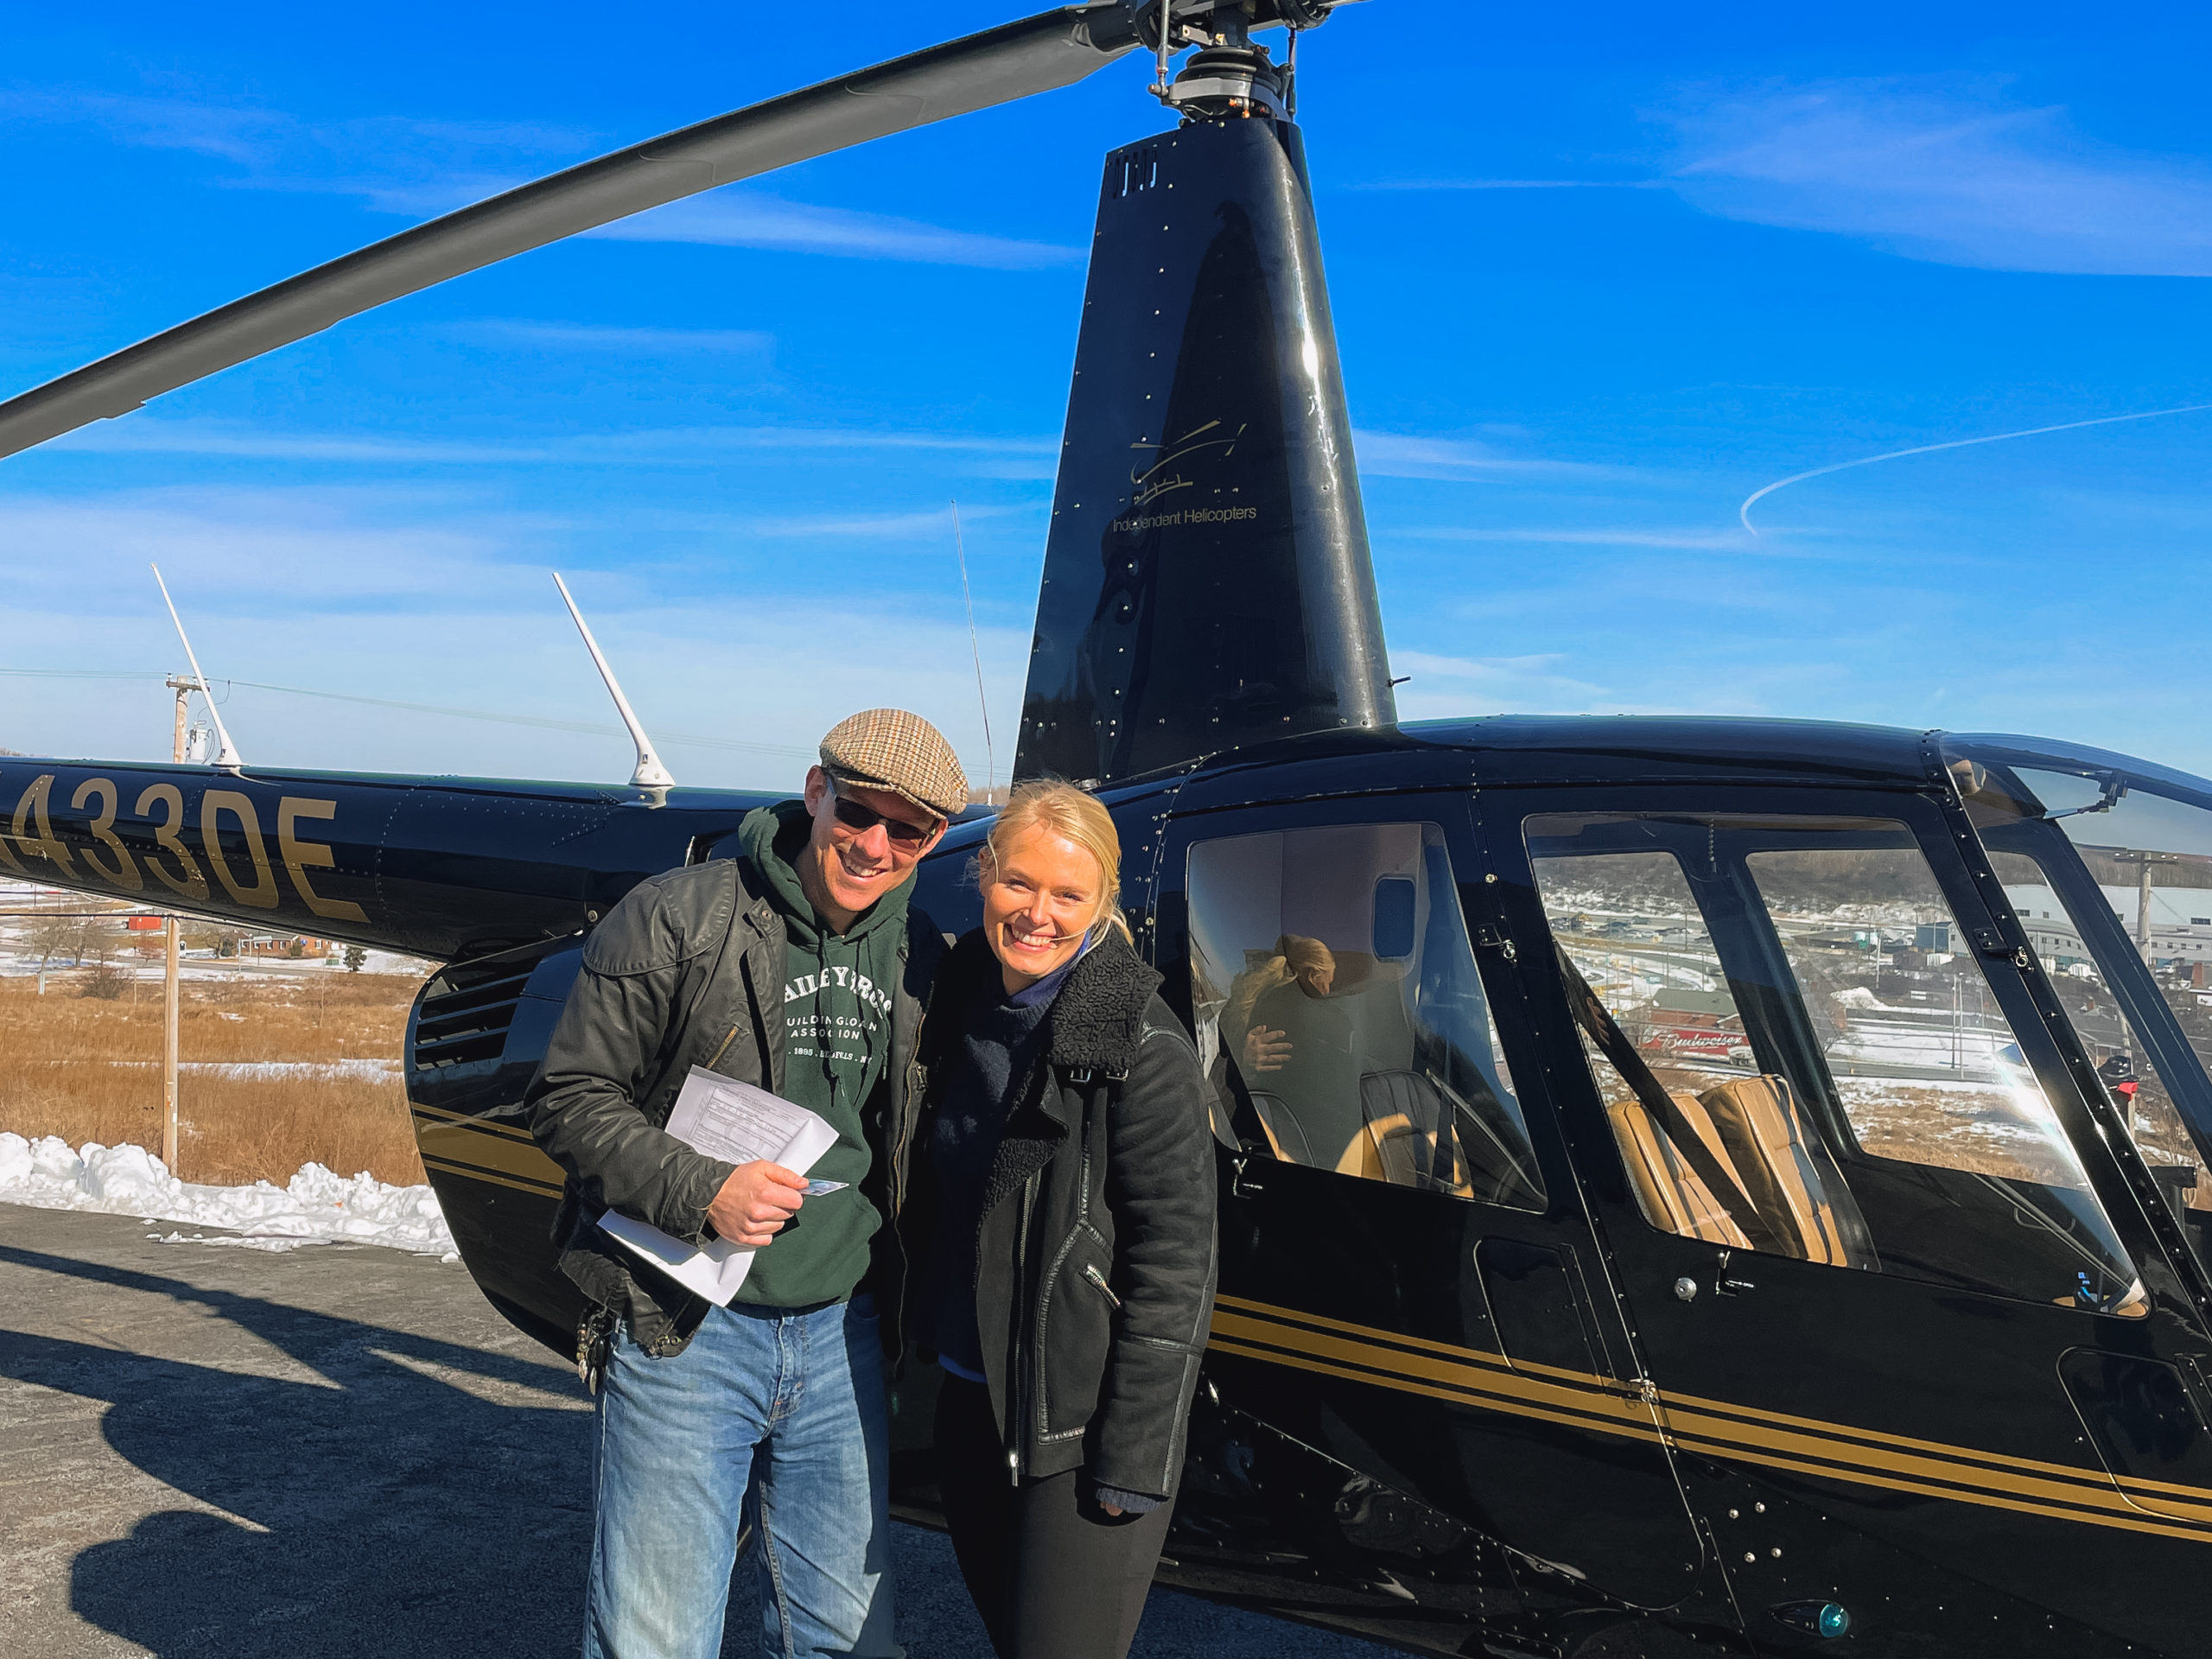 helicopter pilot completes requirements for private pilot license